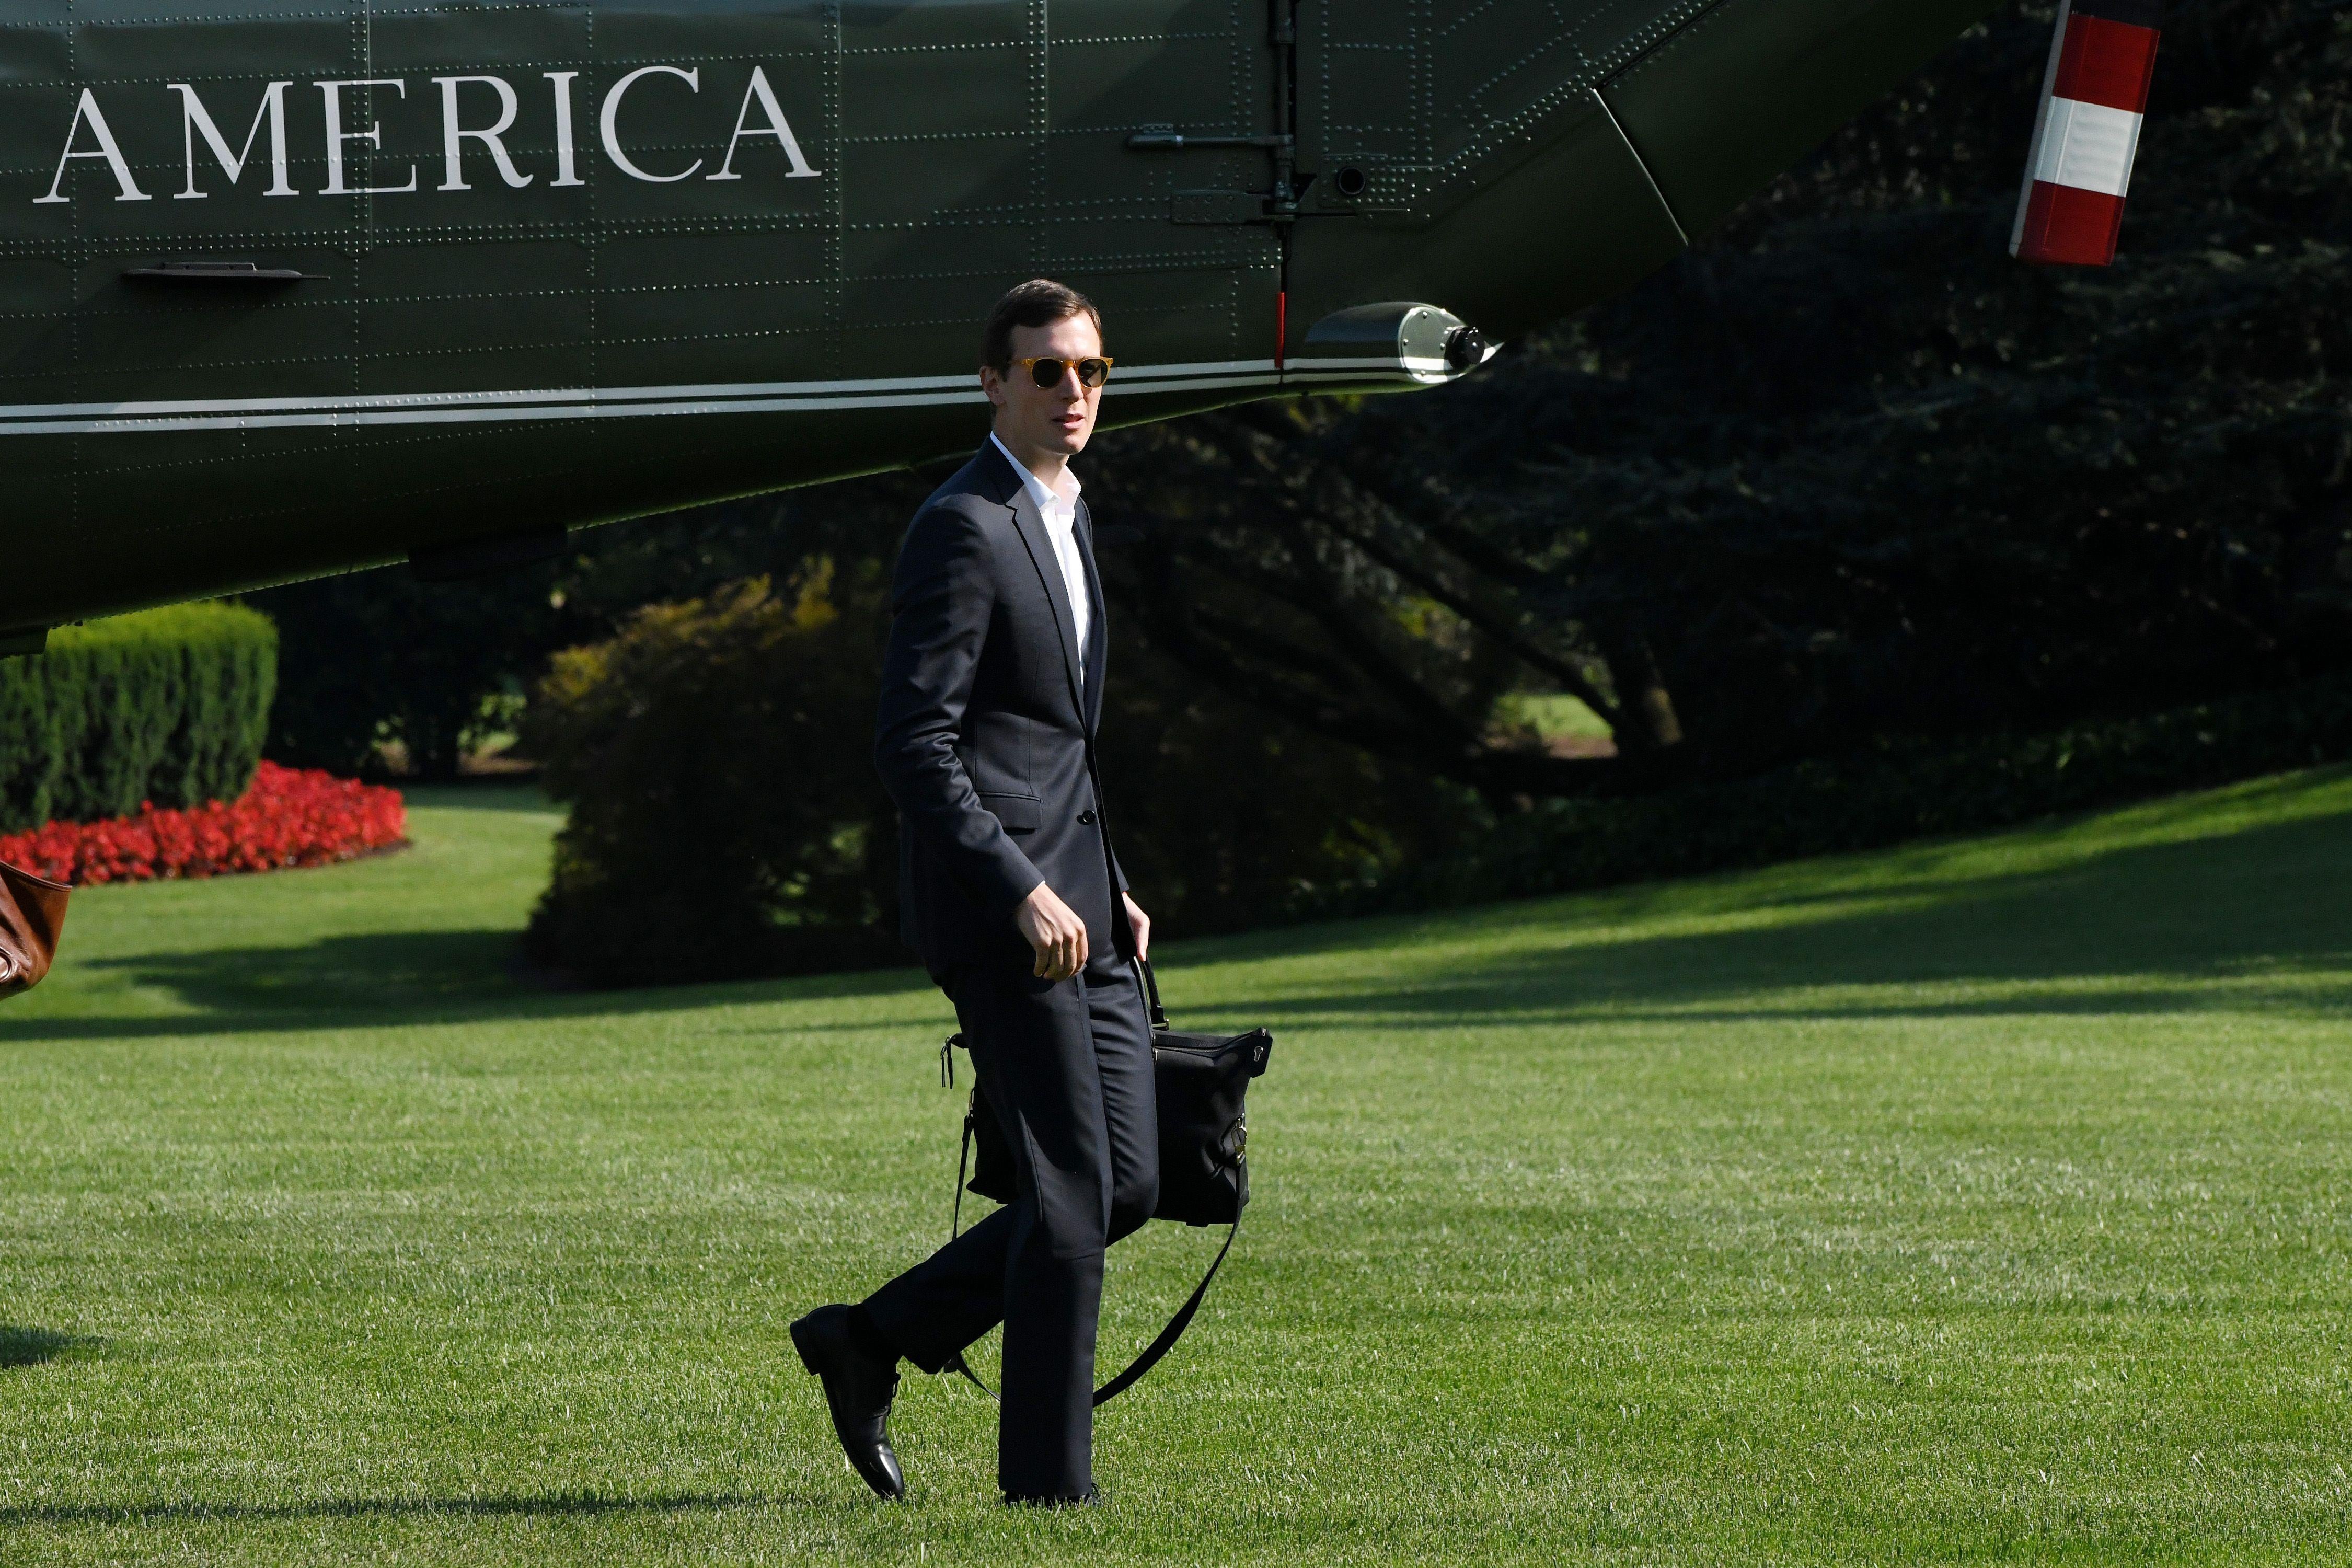 Jared Kushner crosses the South Lawn at the White House on July 1, 2018.